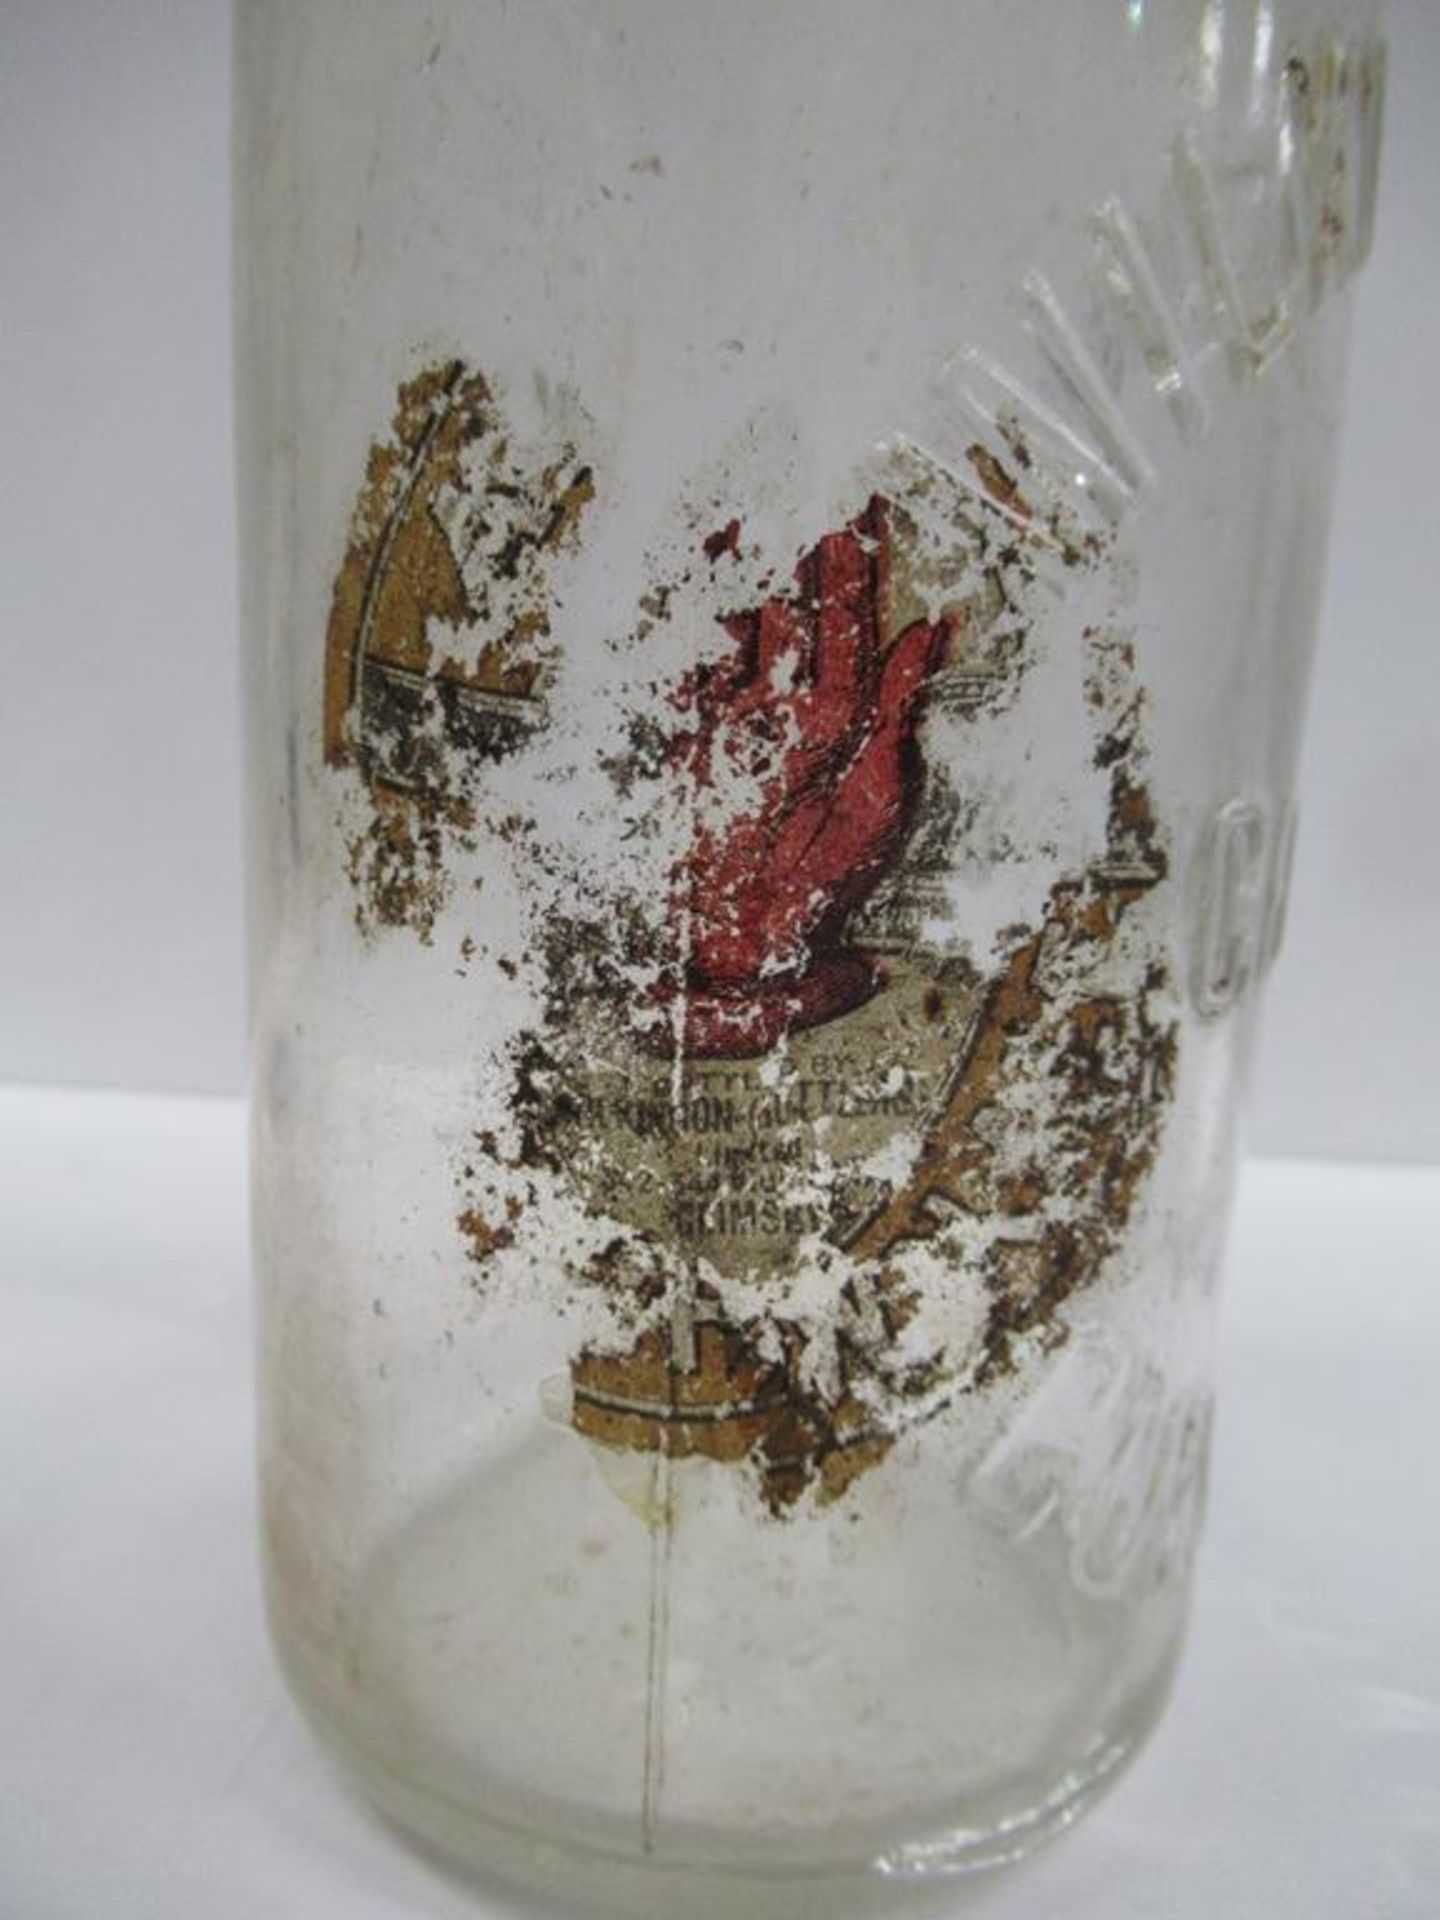 4x Grimsby (3x Scunthorpe) Wilkinsons & Co. bottles - Image 12 of 14